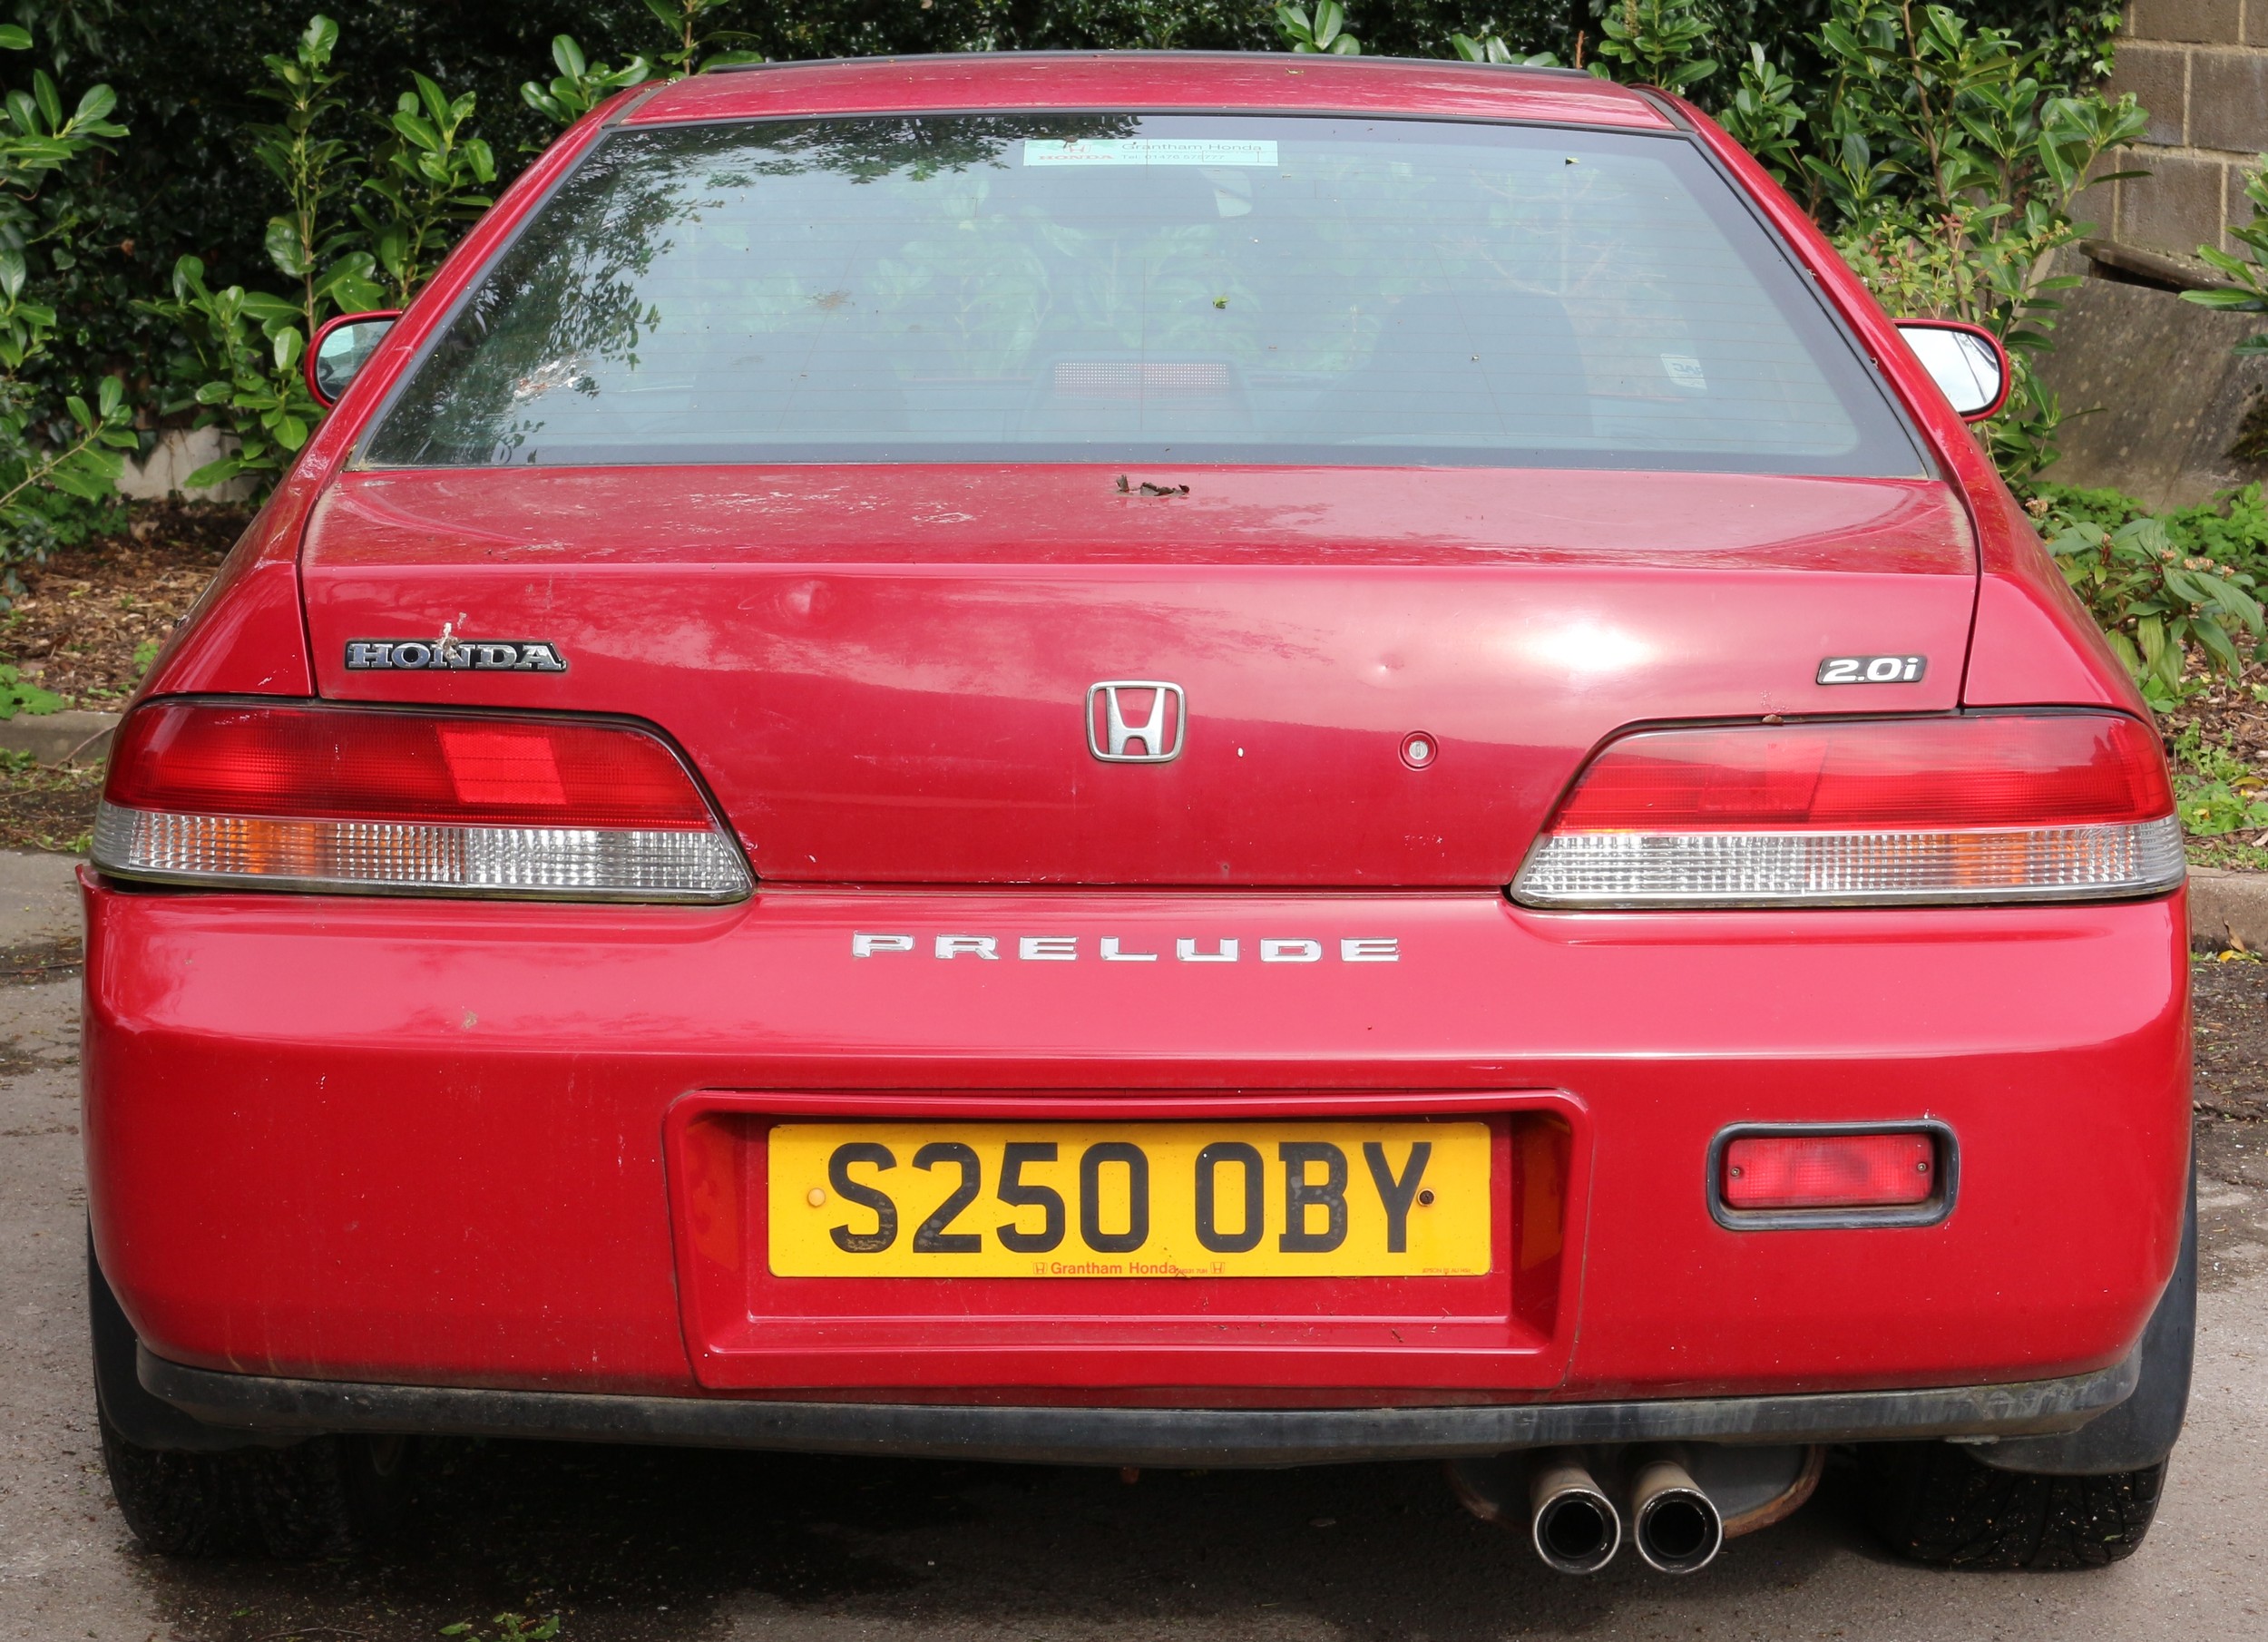 A Honda Prelude 2.0I two door saloon car in red, registration S250OBY, petrol, four speed - Image 8 of 9